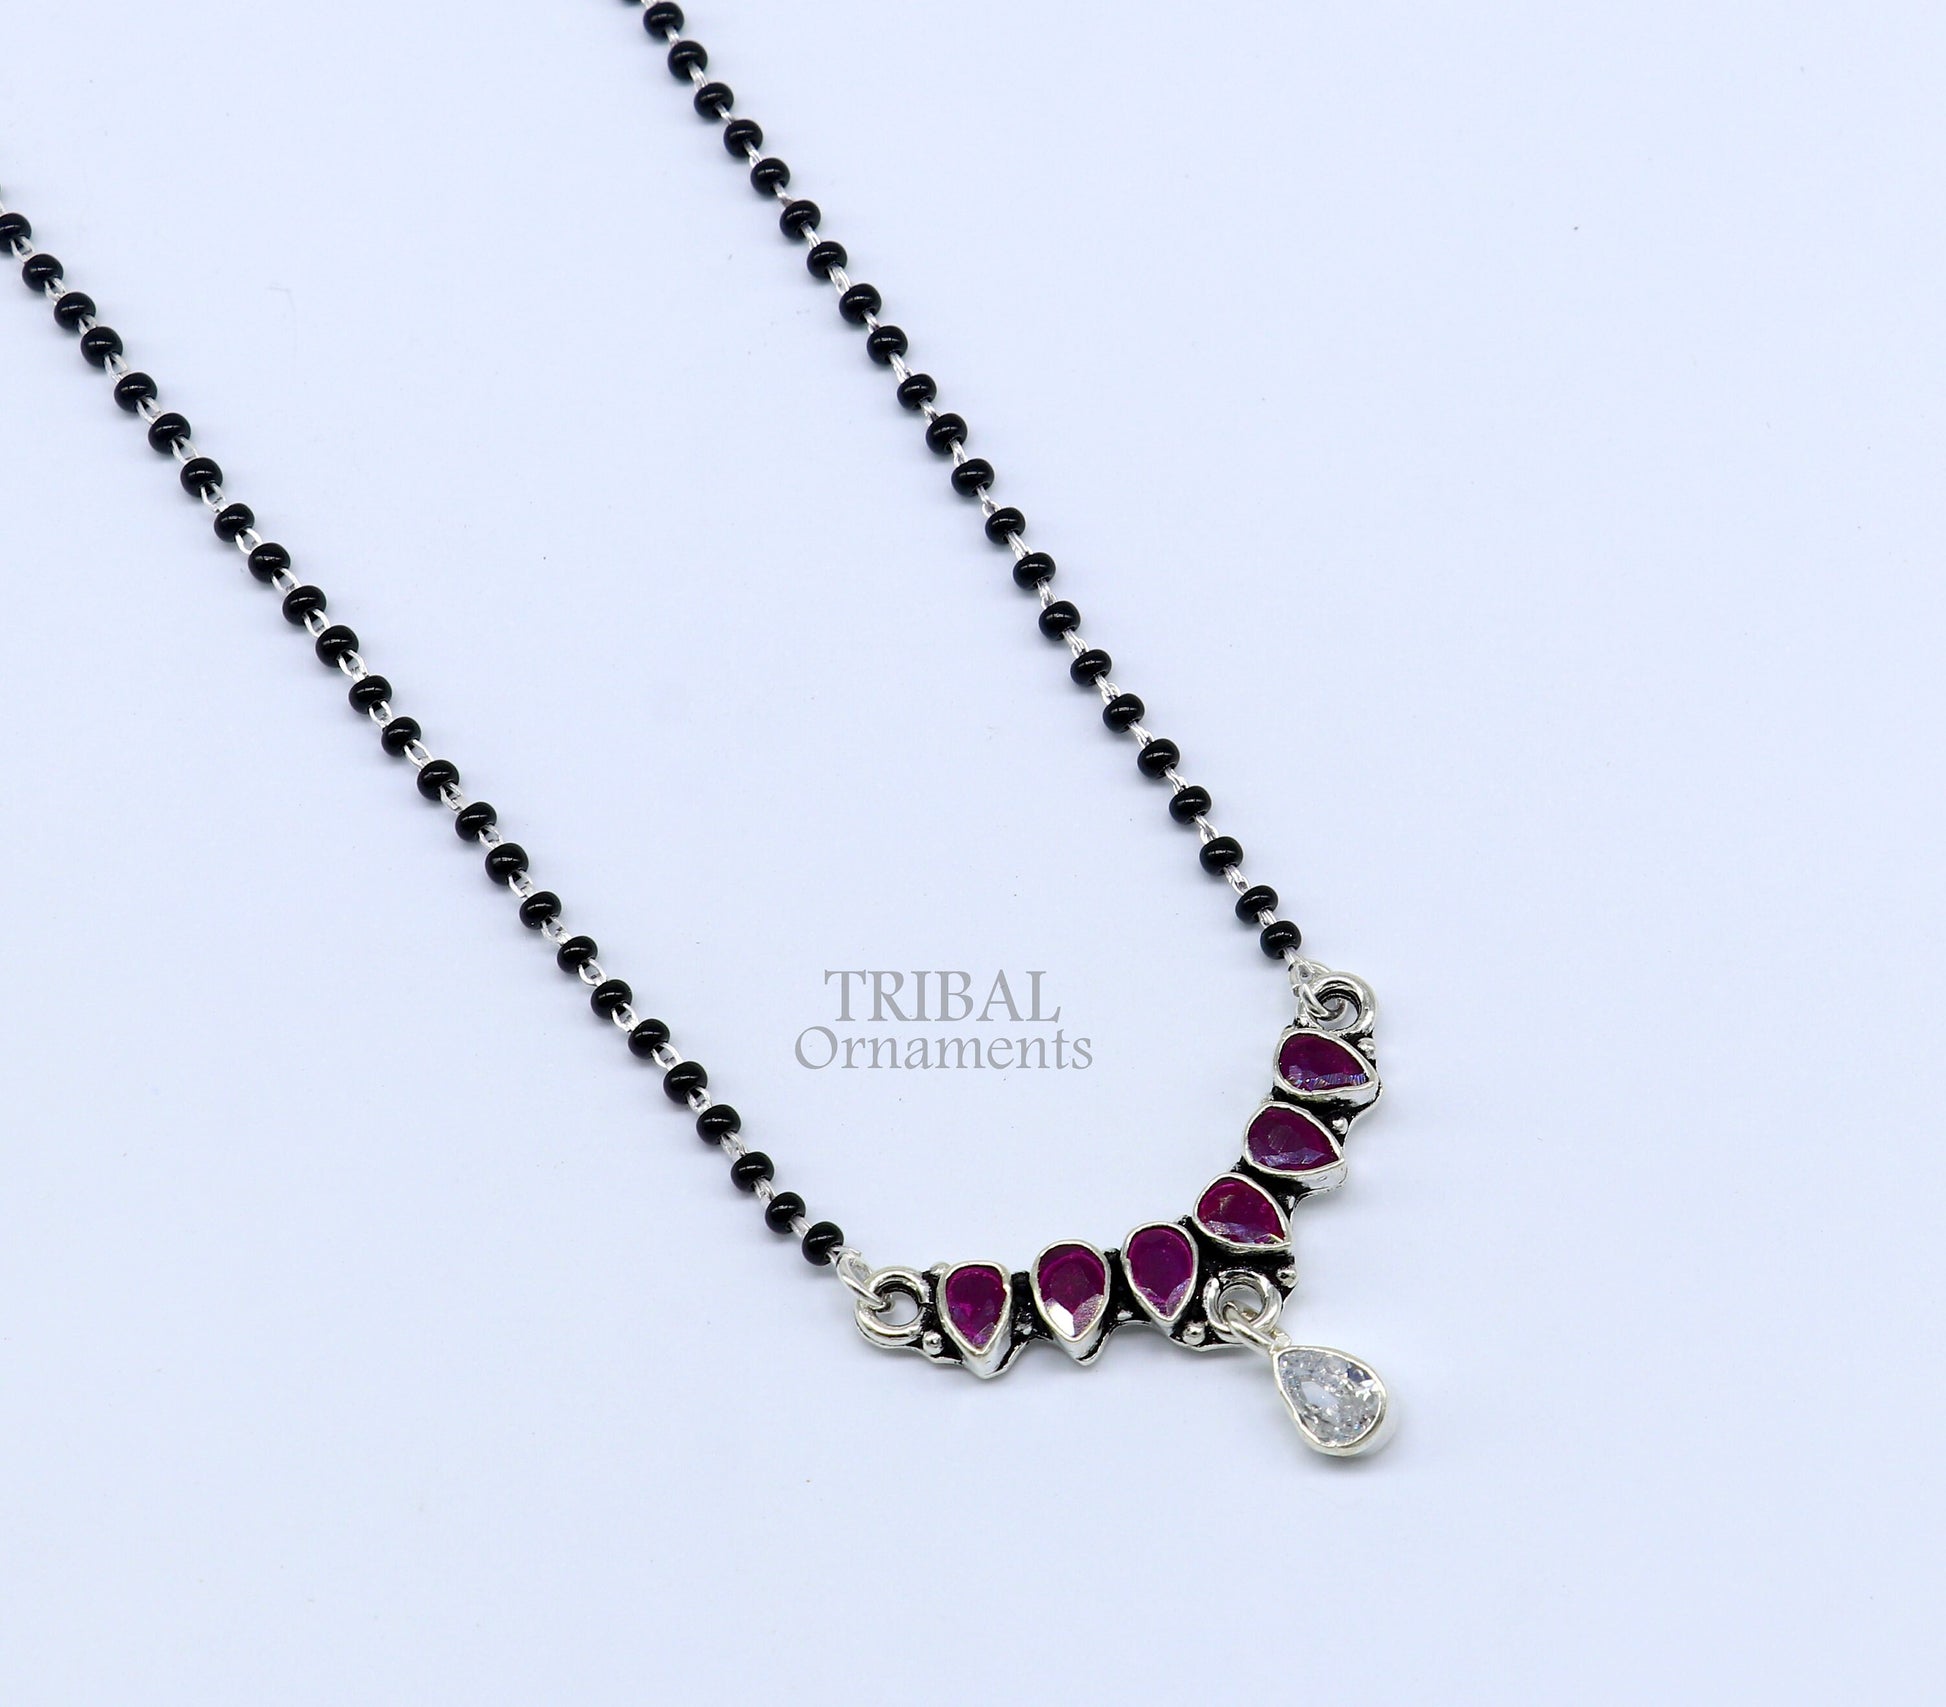 925 sterling silver black beads chain Trendy necklace, gorgeous flower design pendant, traditional style brides Mangalsutra necklace MS02 - TRIBAL ORNAMENTS